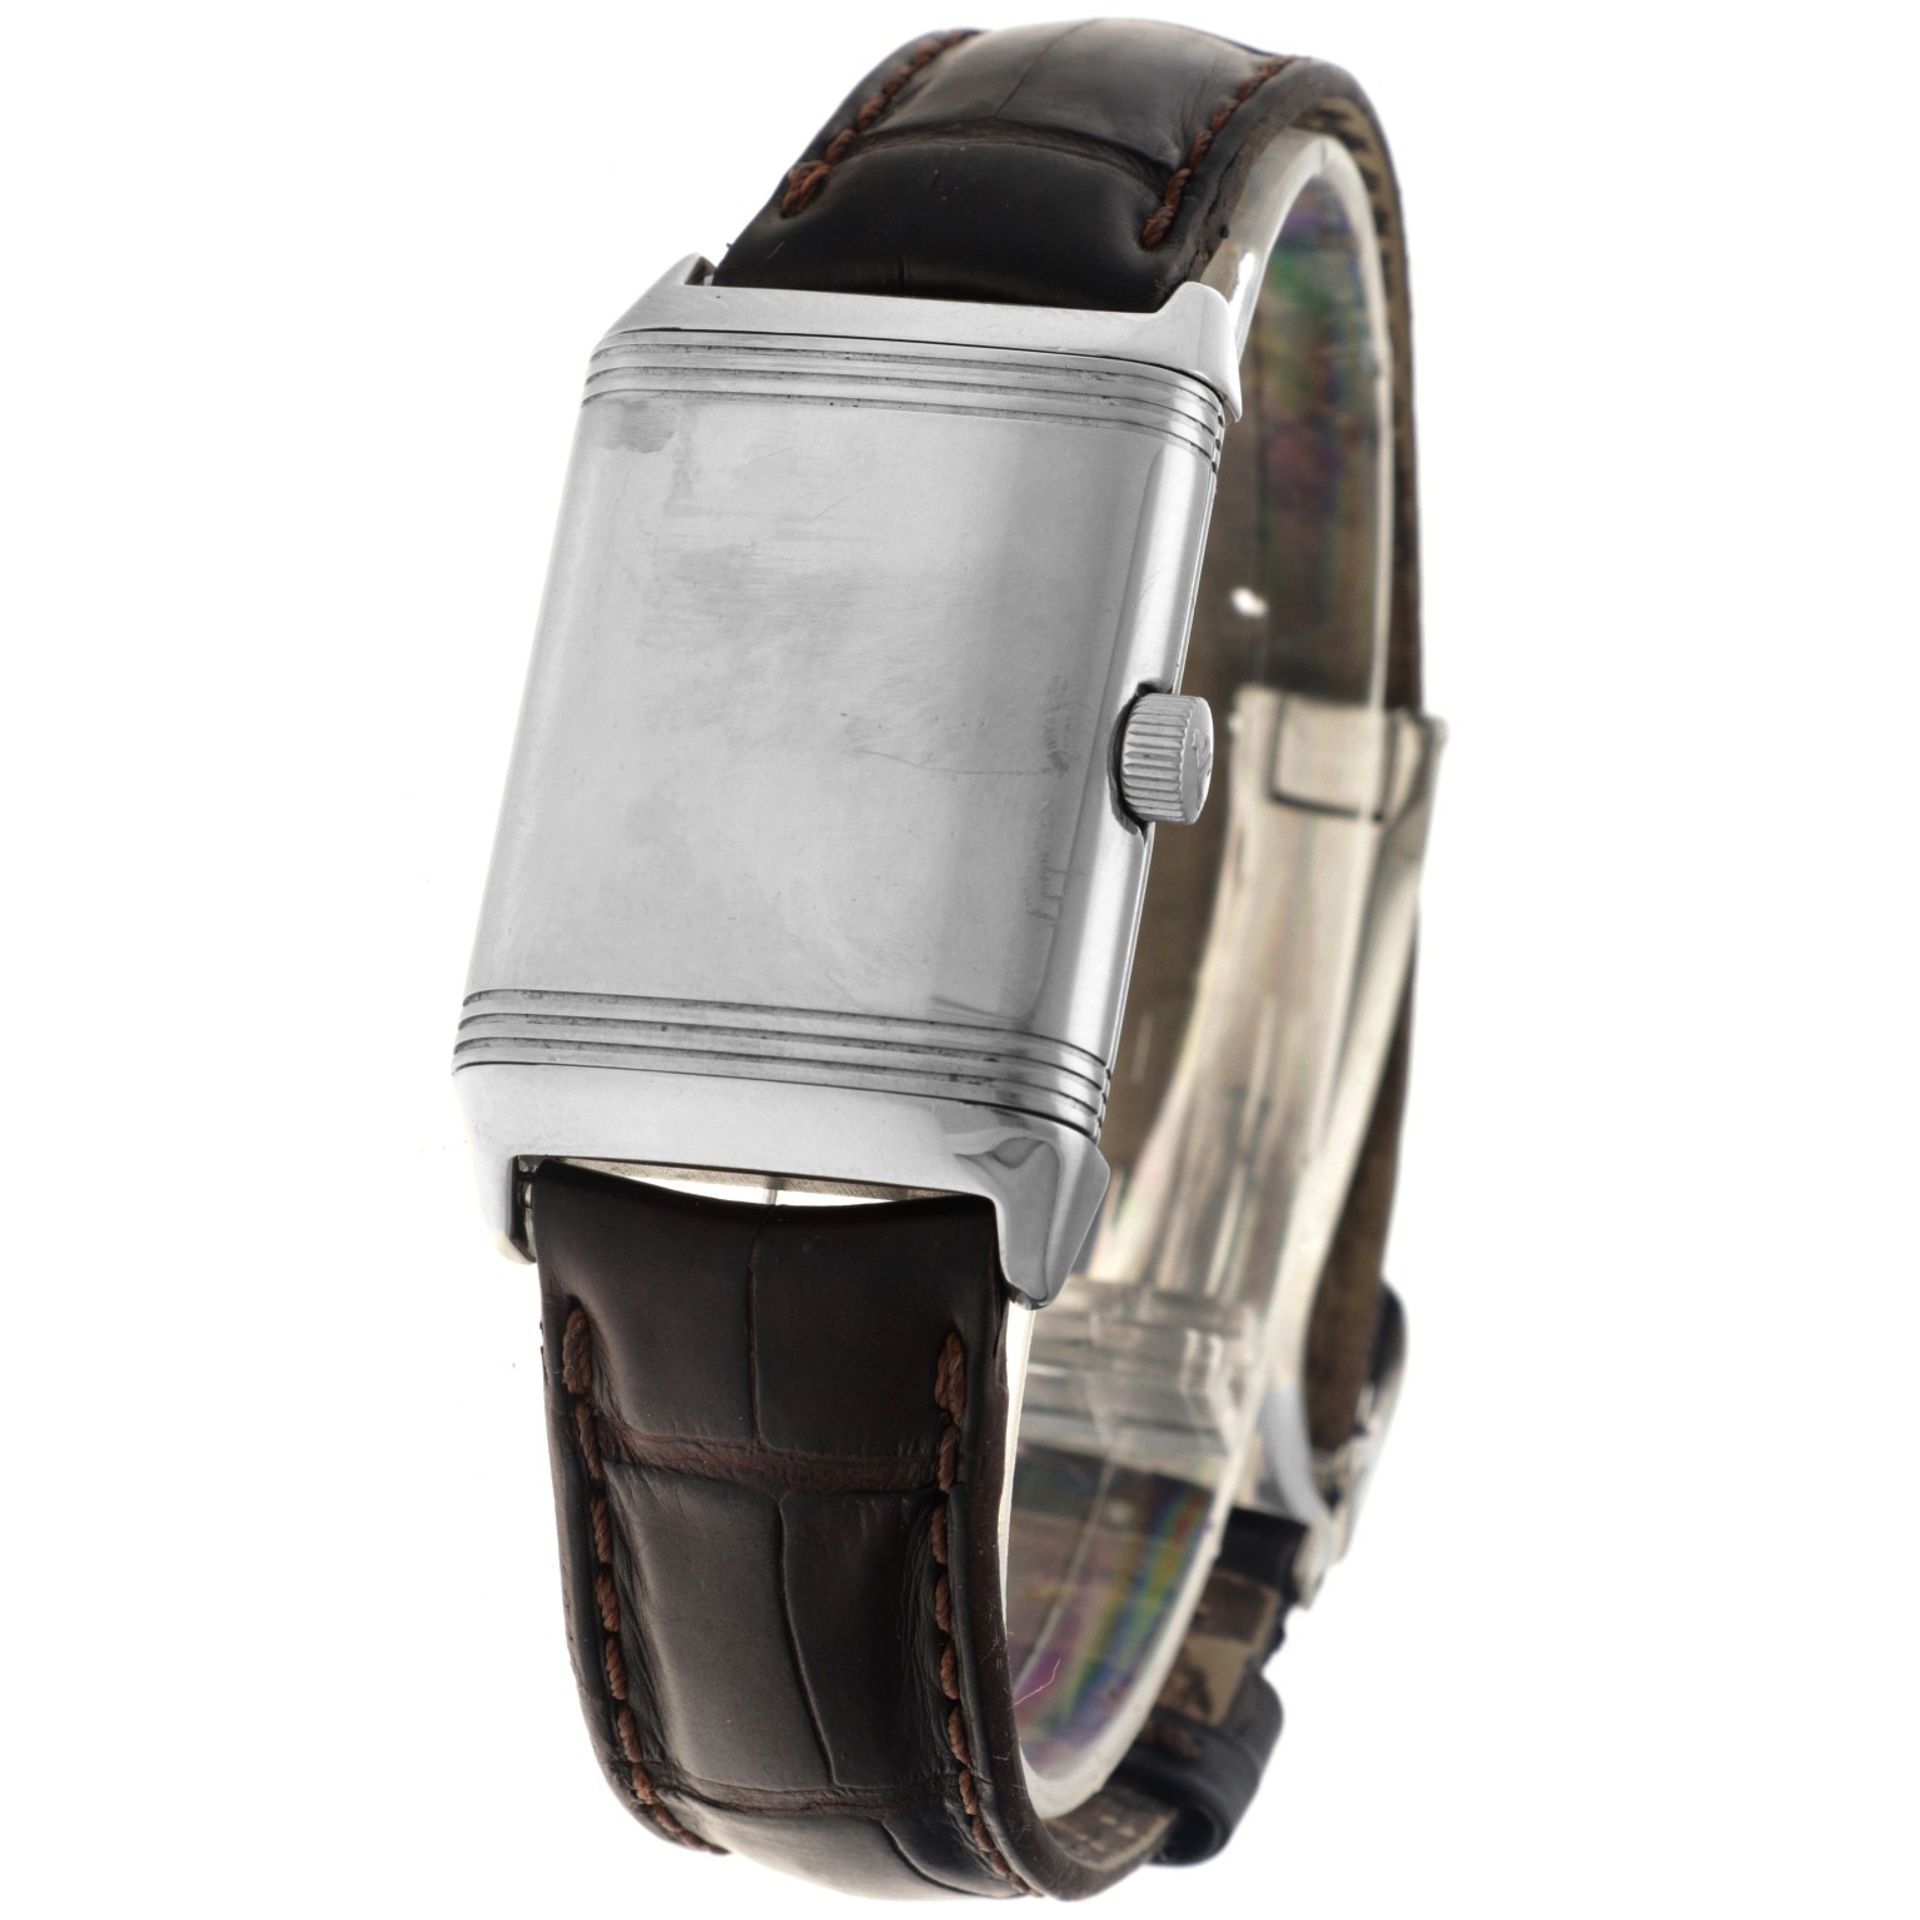 No Reserve - Jaeger-LeCoultre Reverso Grande Taille 270.8.62 - Men's watch.  - Image 3 of 6